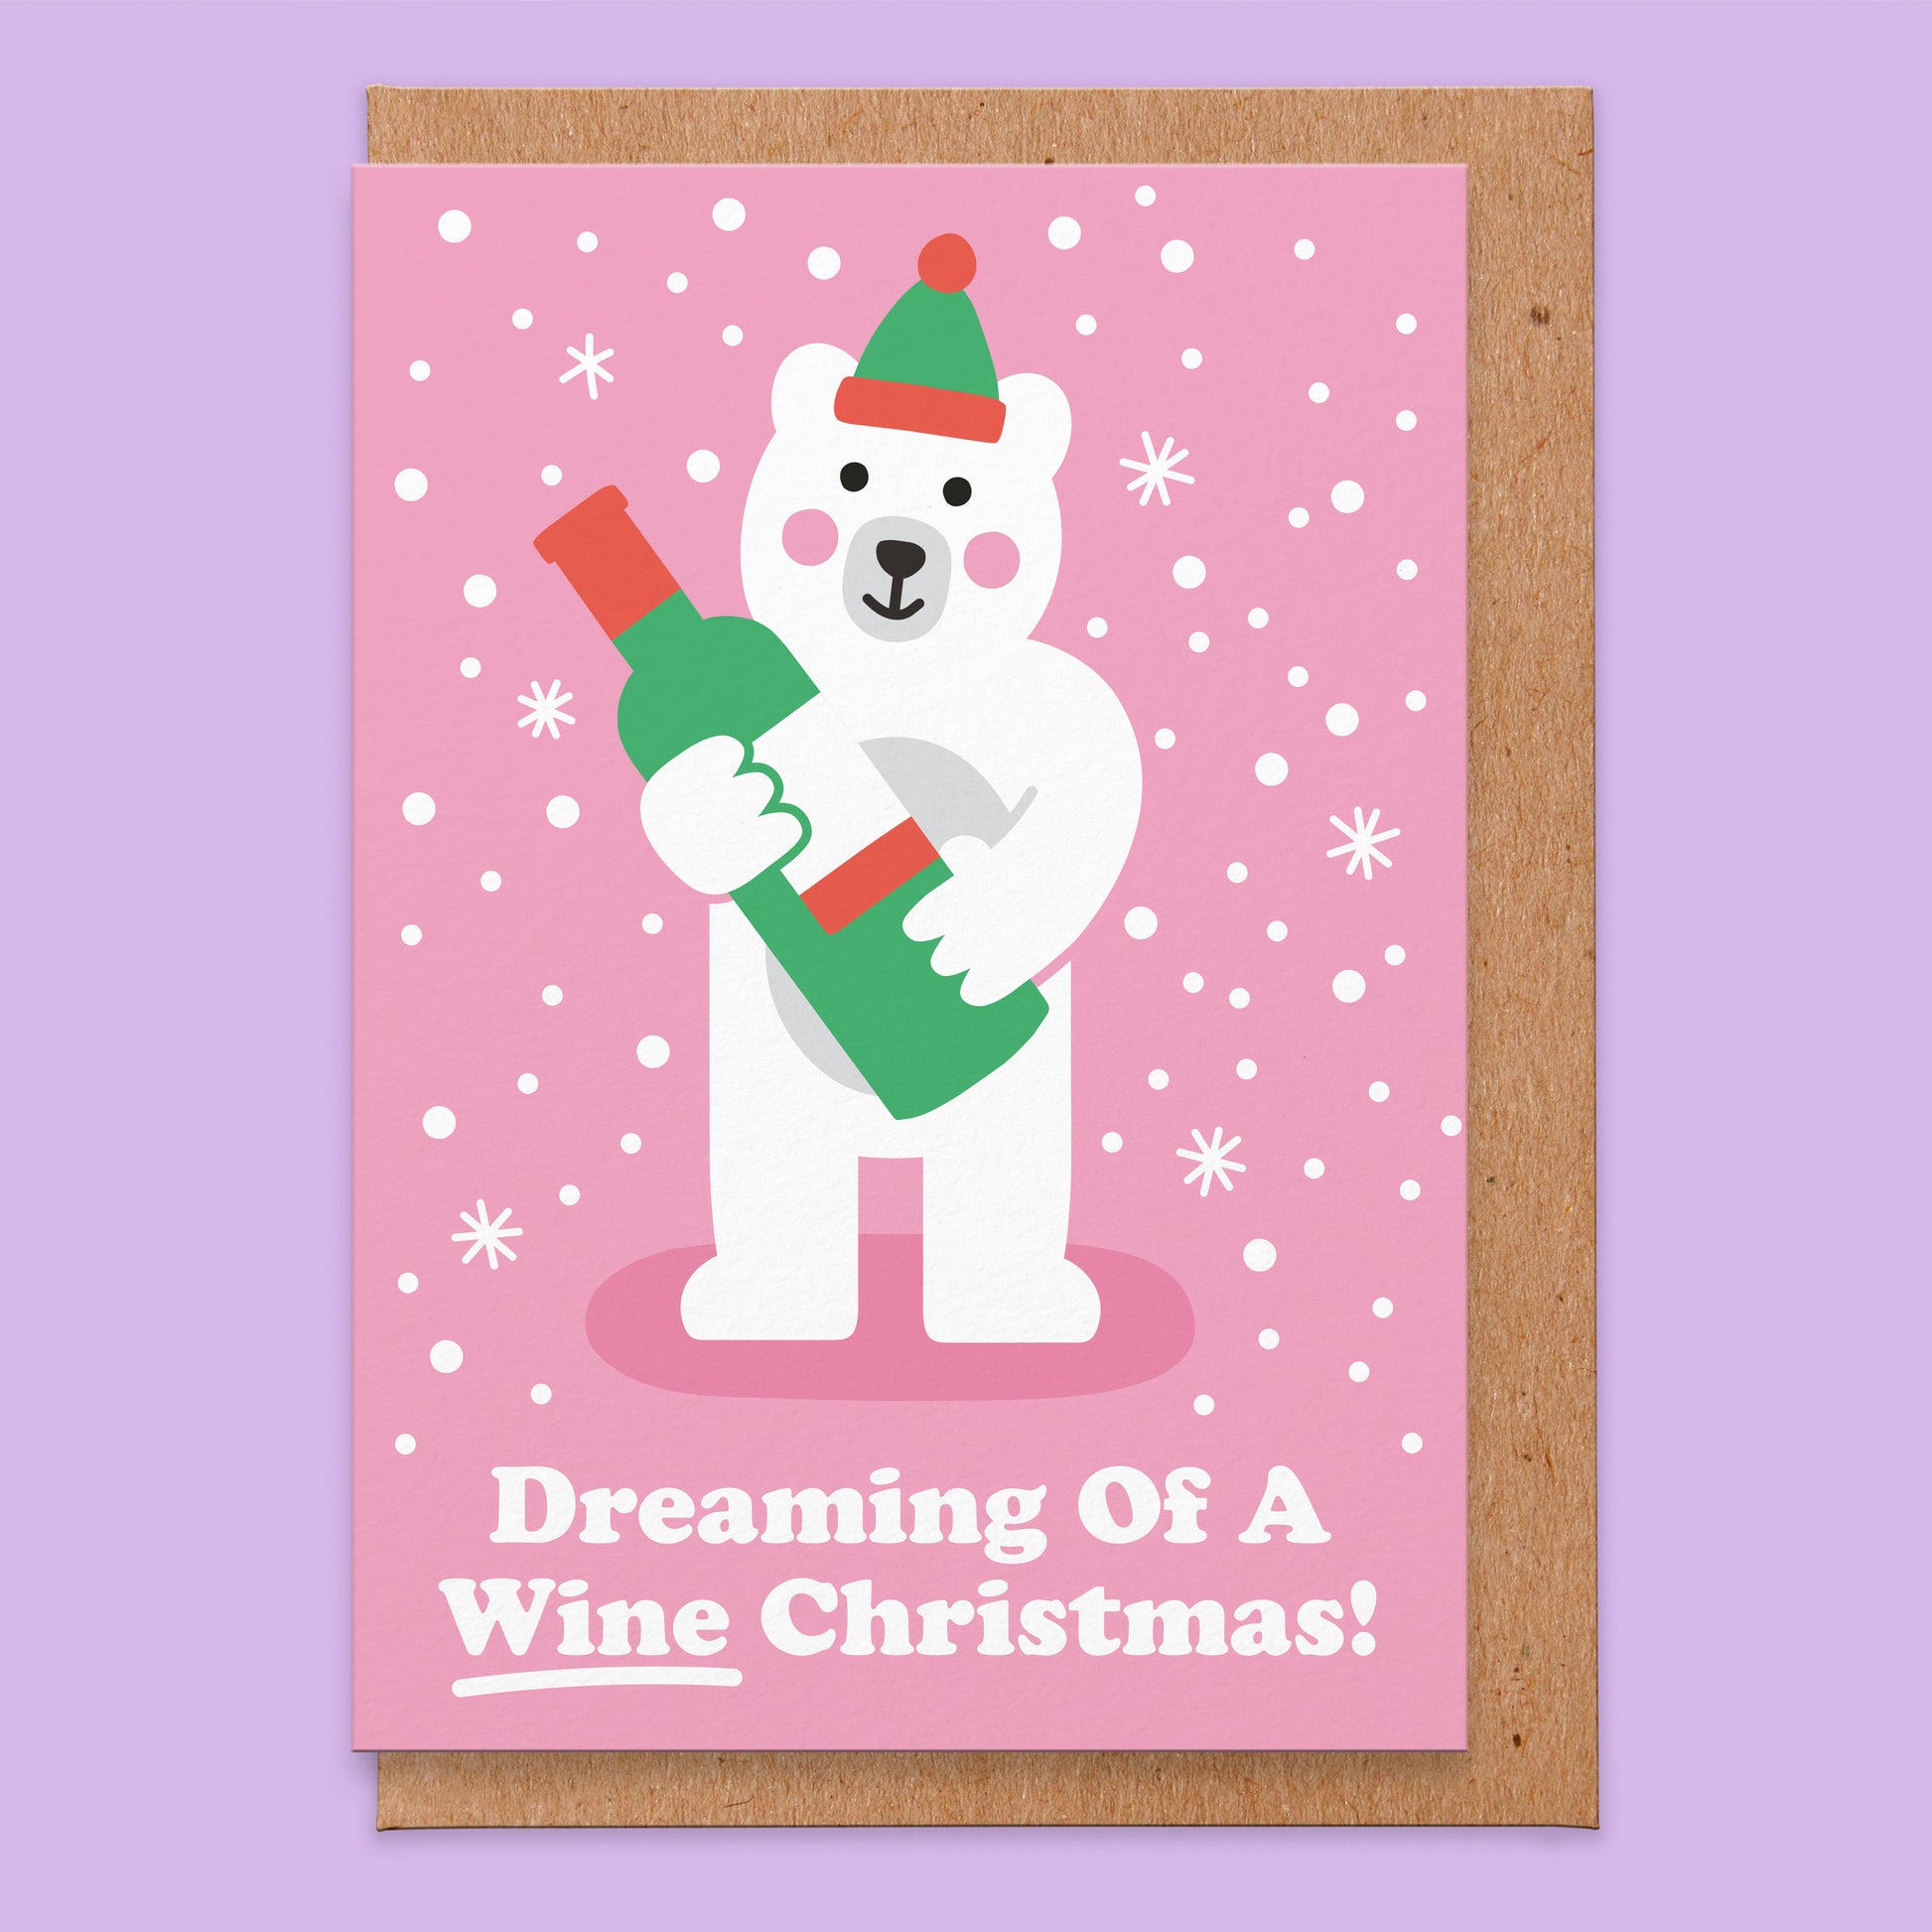 Christmas greetings card with an illustration of a white bear holding a bottle of wine and says Dreaming Of A Wine Christmas!